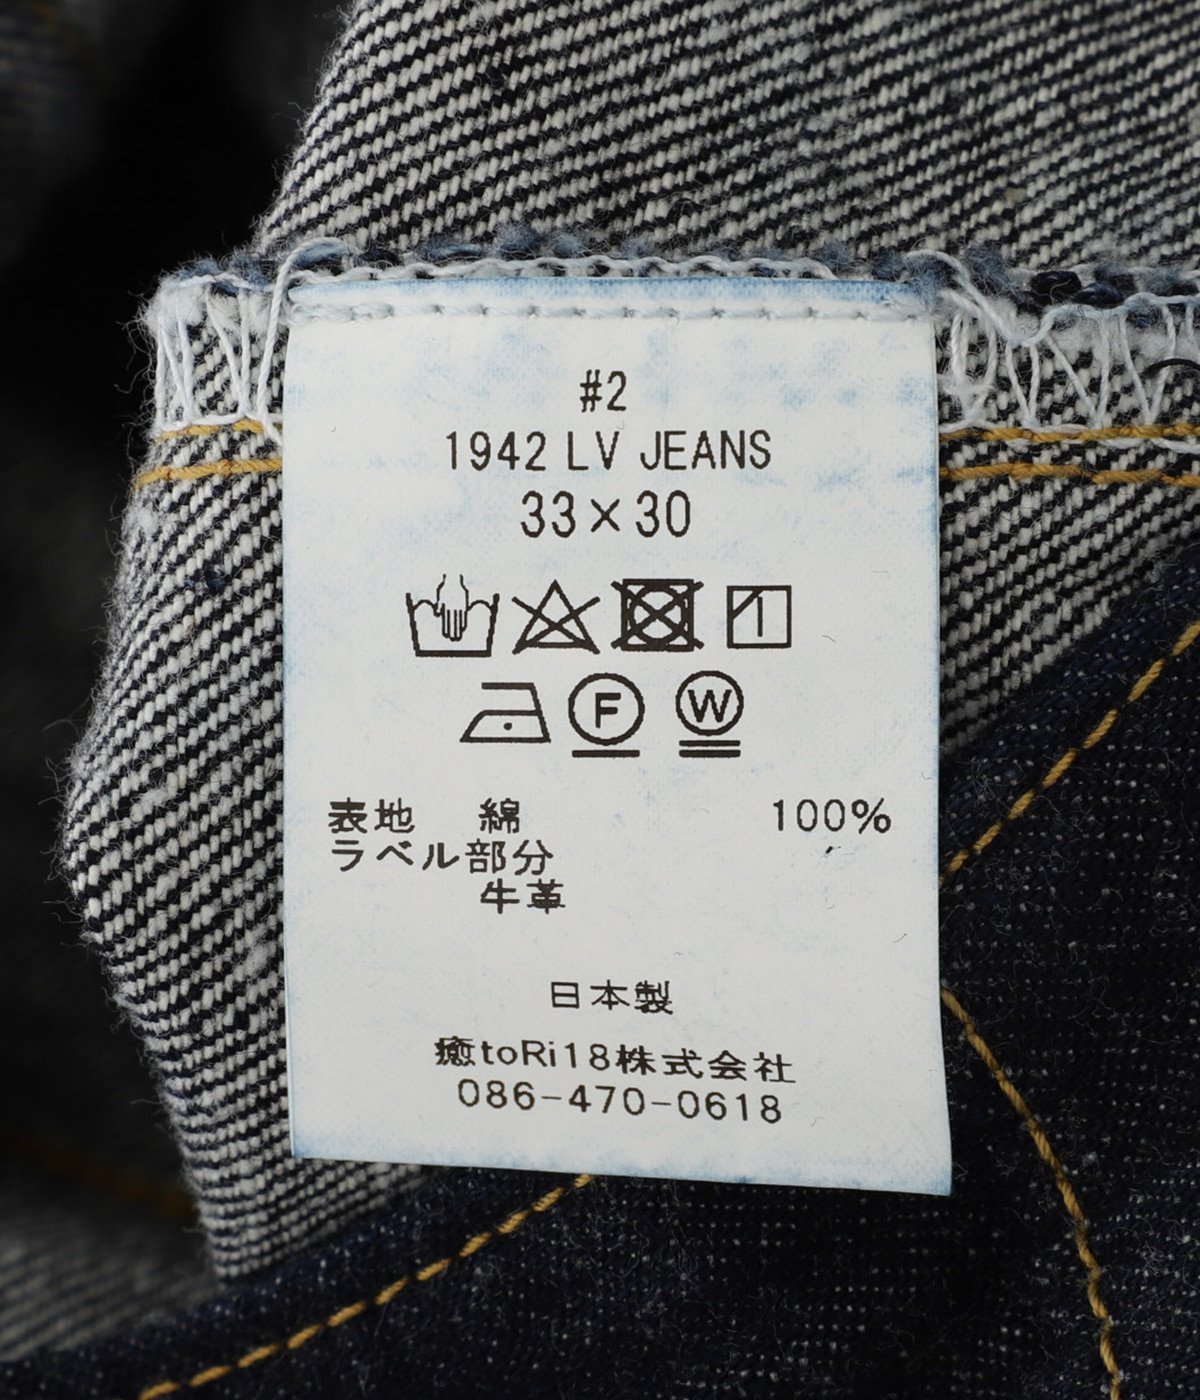 New manual #002 1942 LV JEANS OW 33